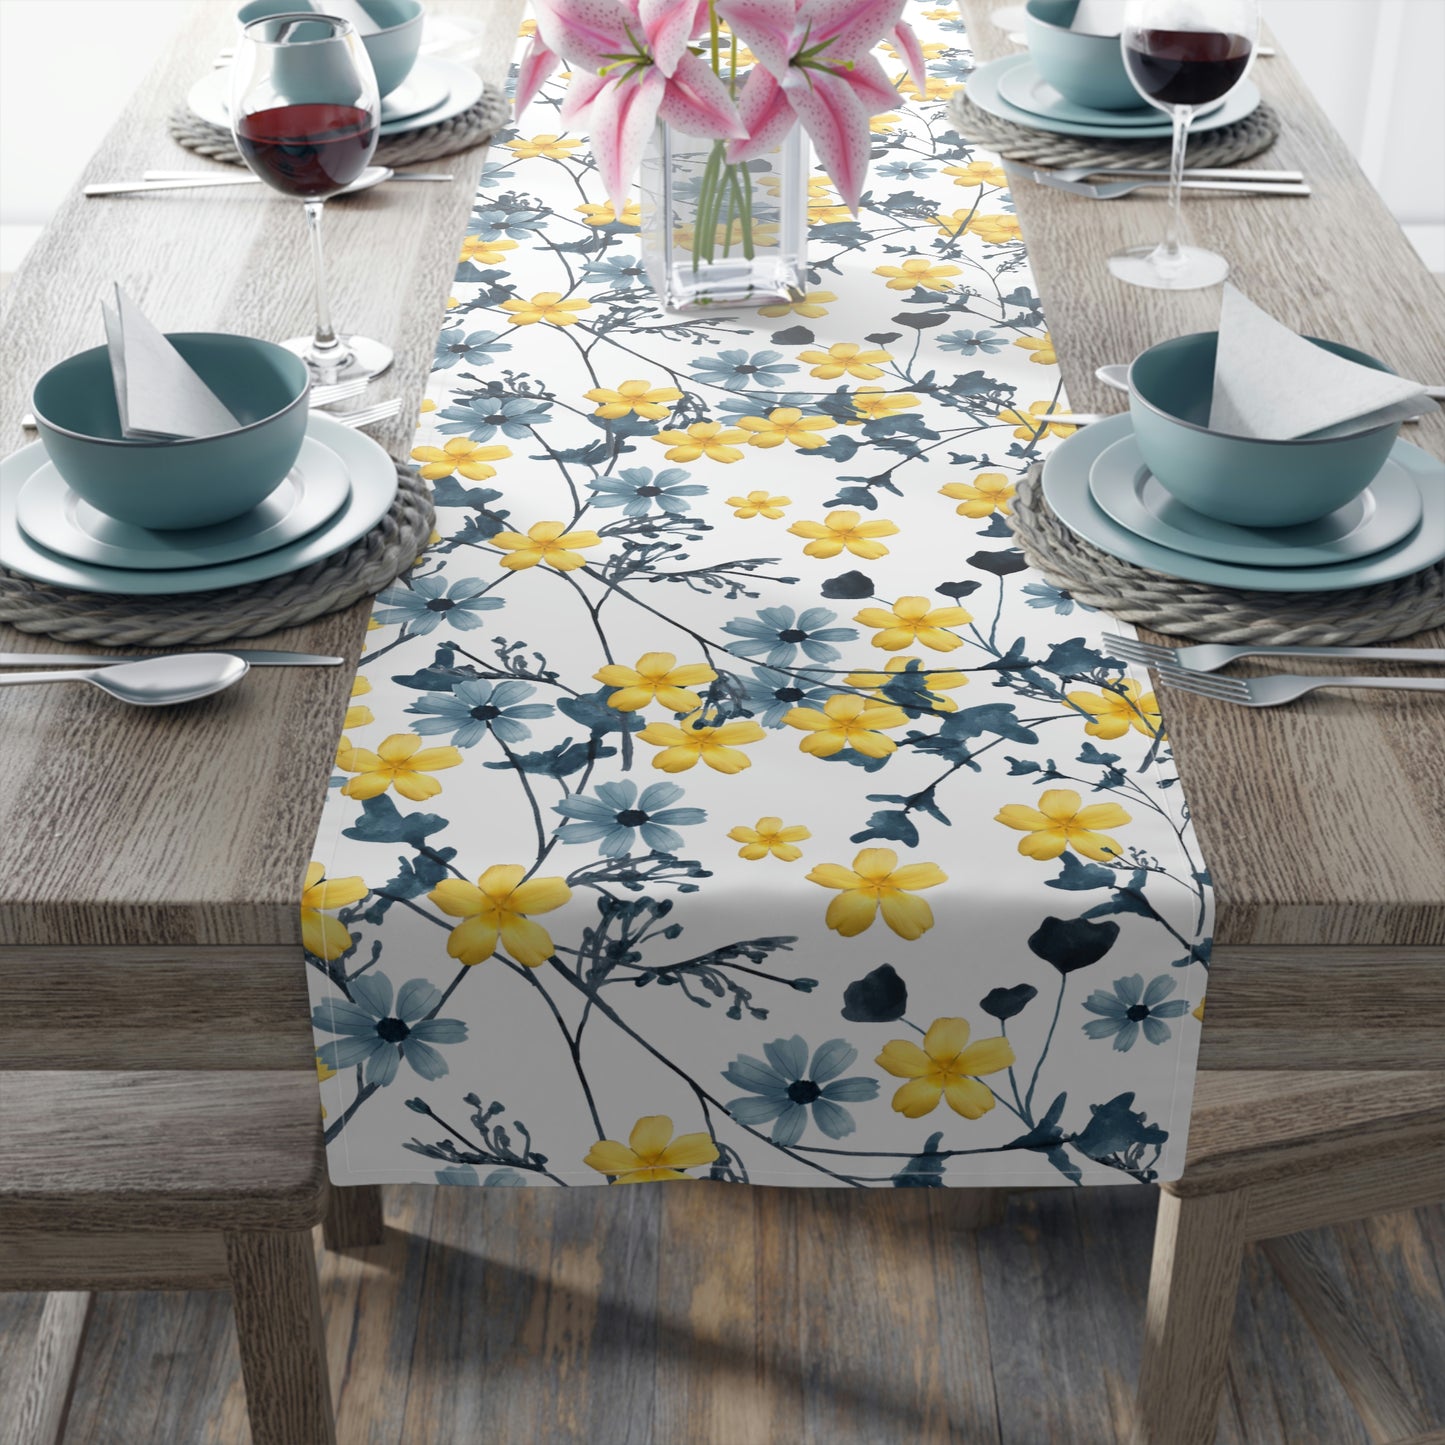 blue and yellow flower table runner for summer or spring decor